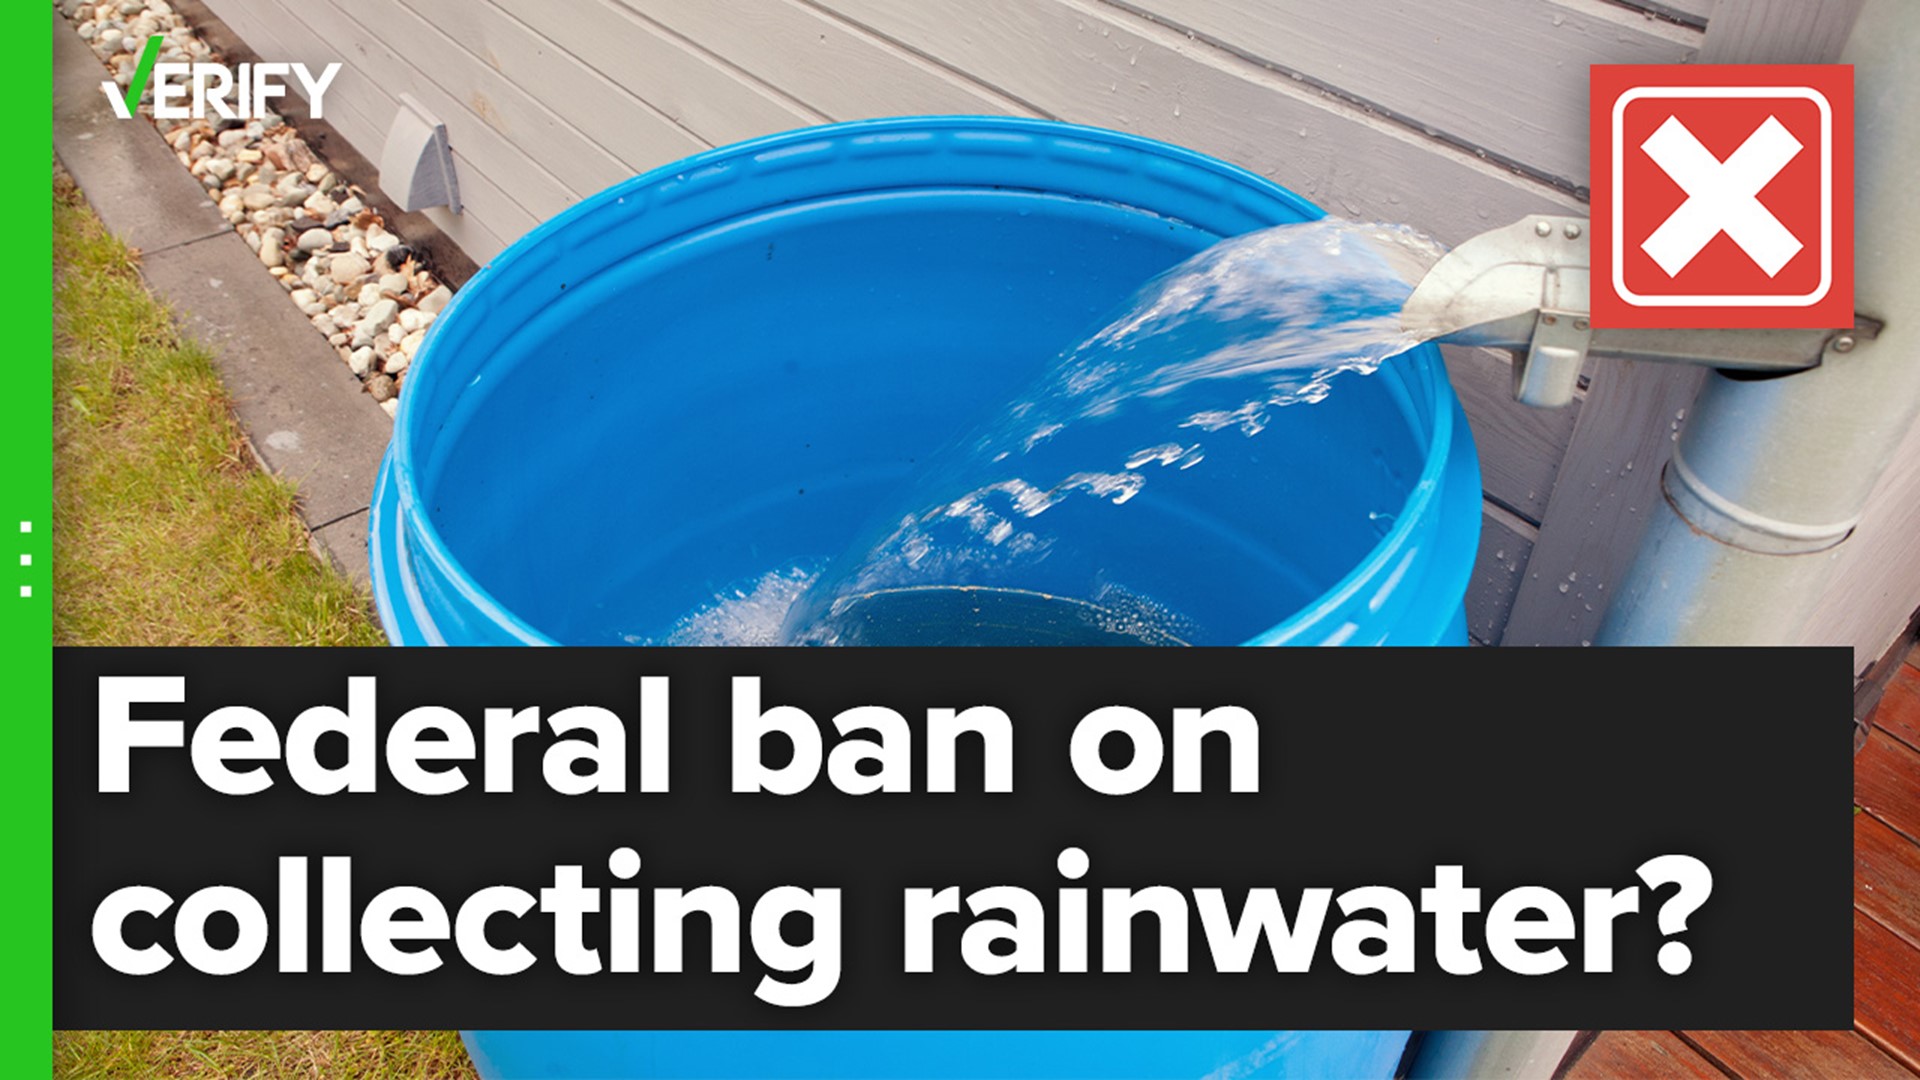 State rules differ on whether people can collect rainwater, but there is no federal law banning the practice.